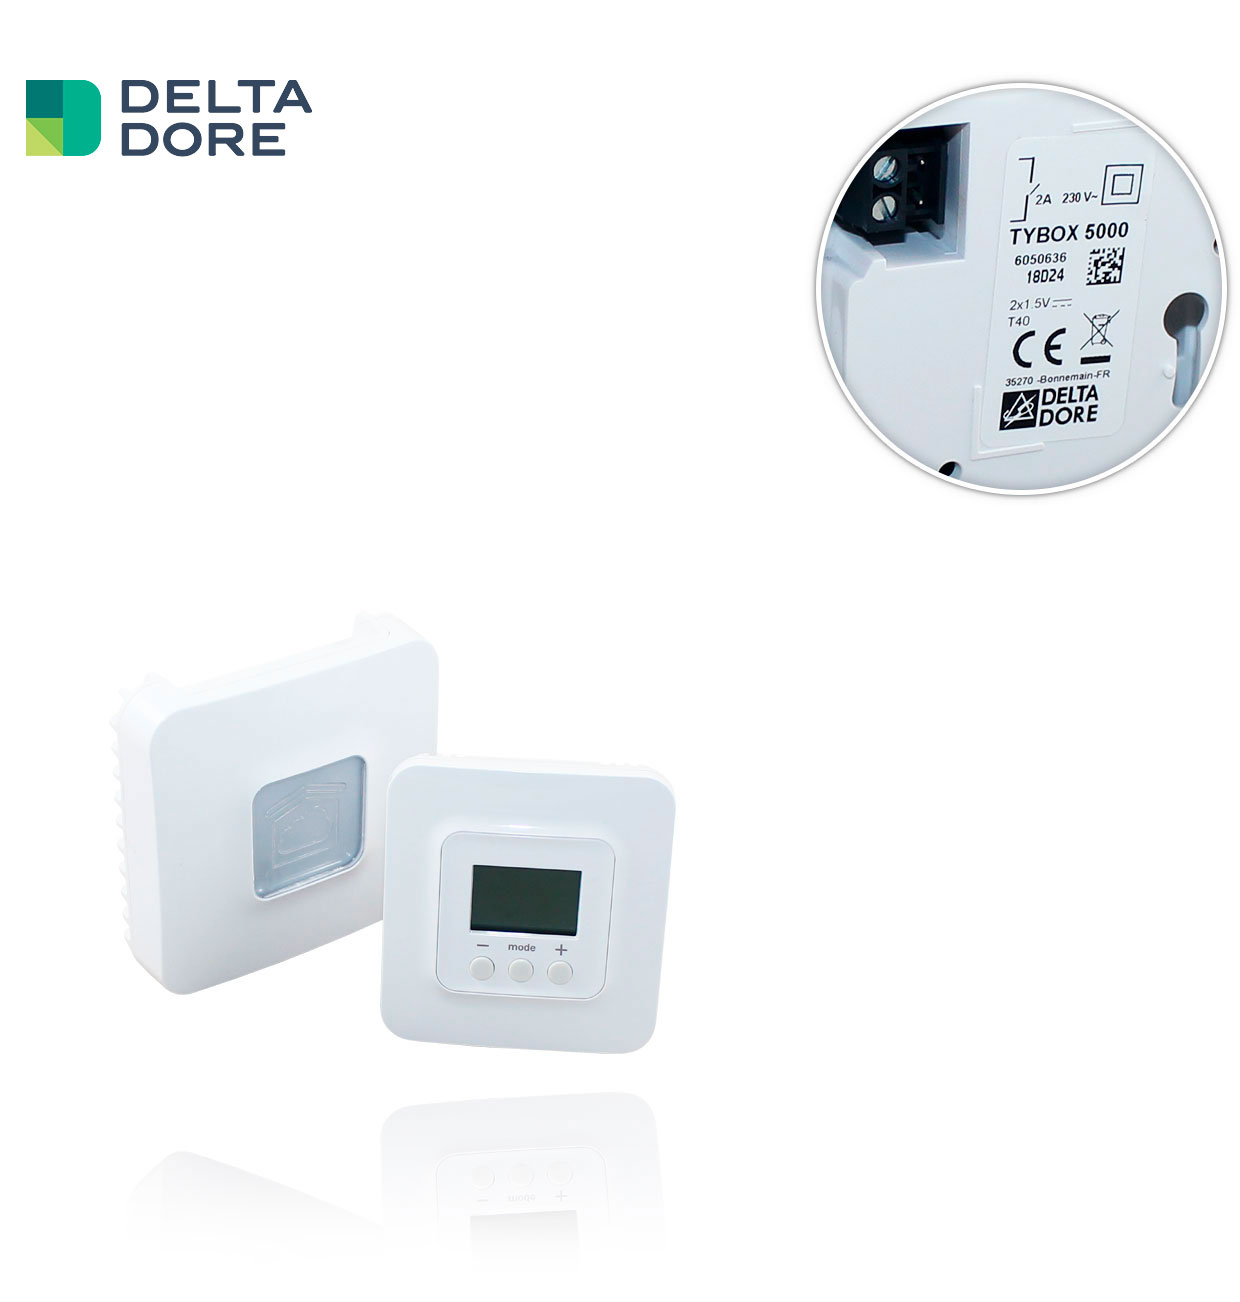 DELTA DORE TYBOX 5000 WIRED THERMOSTAT PACK